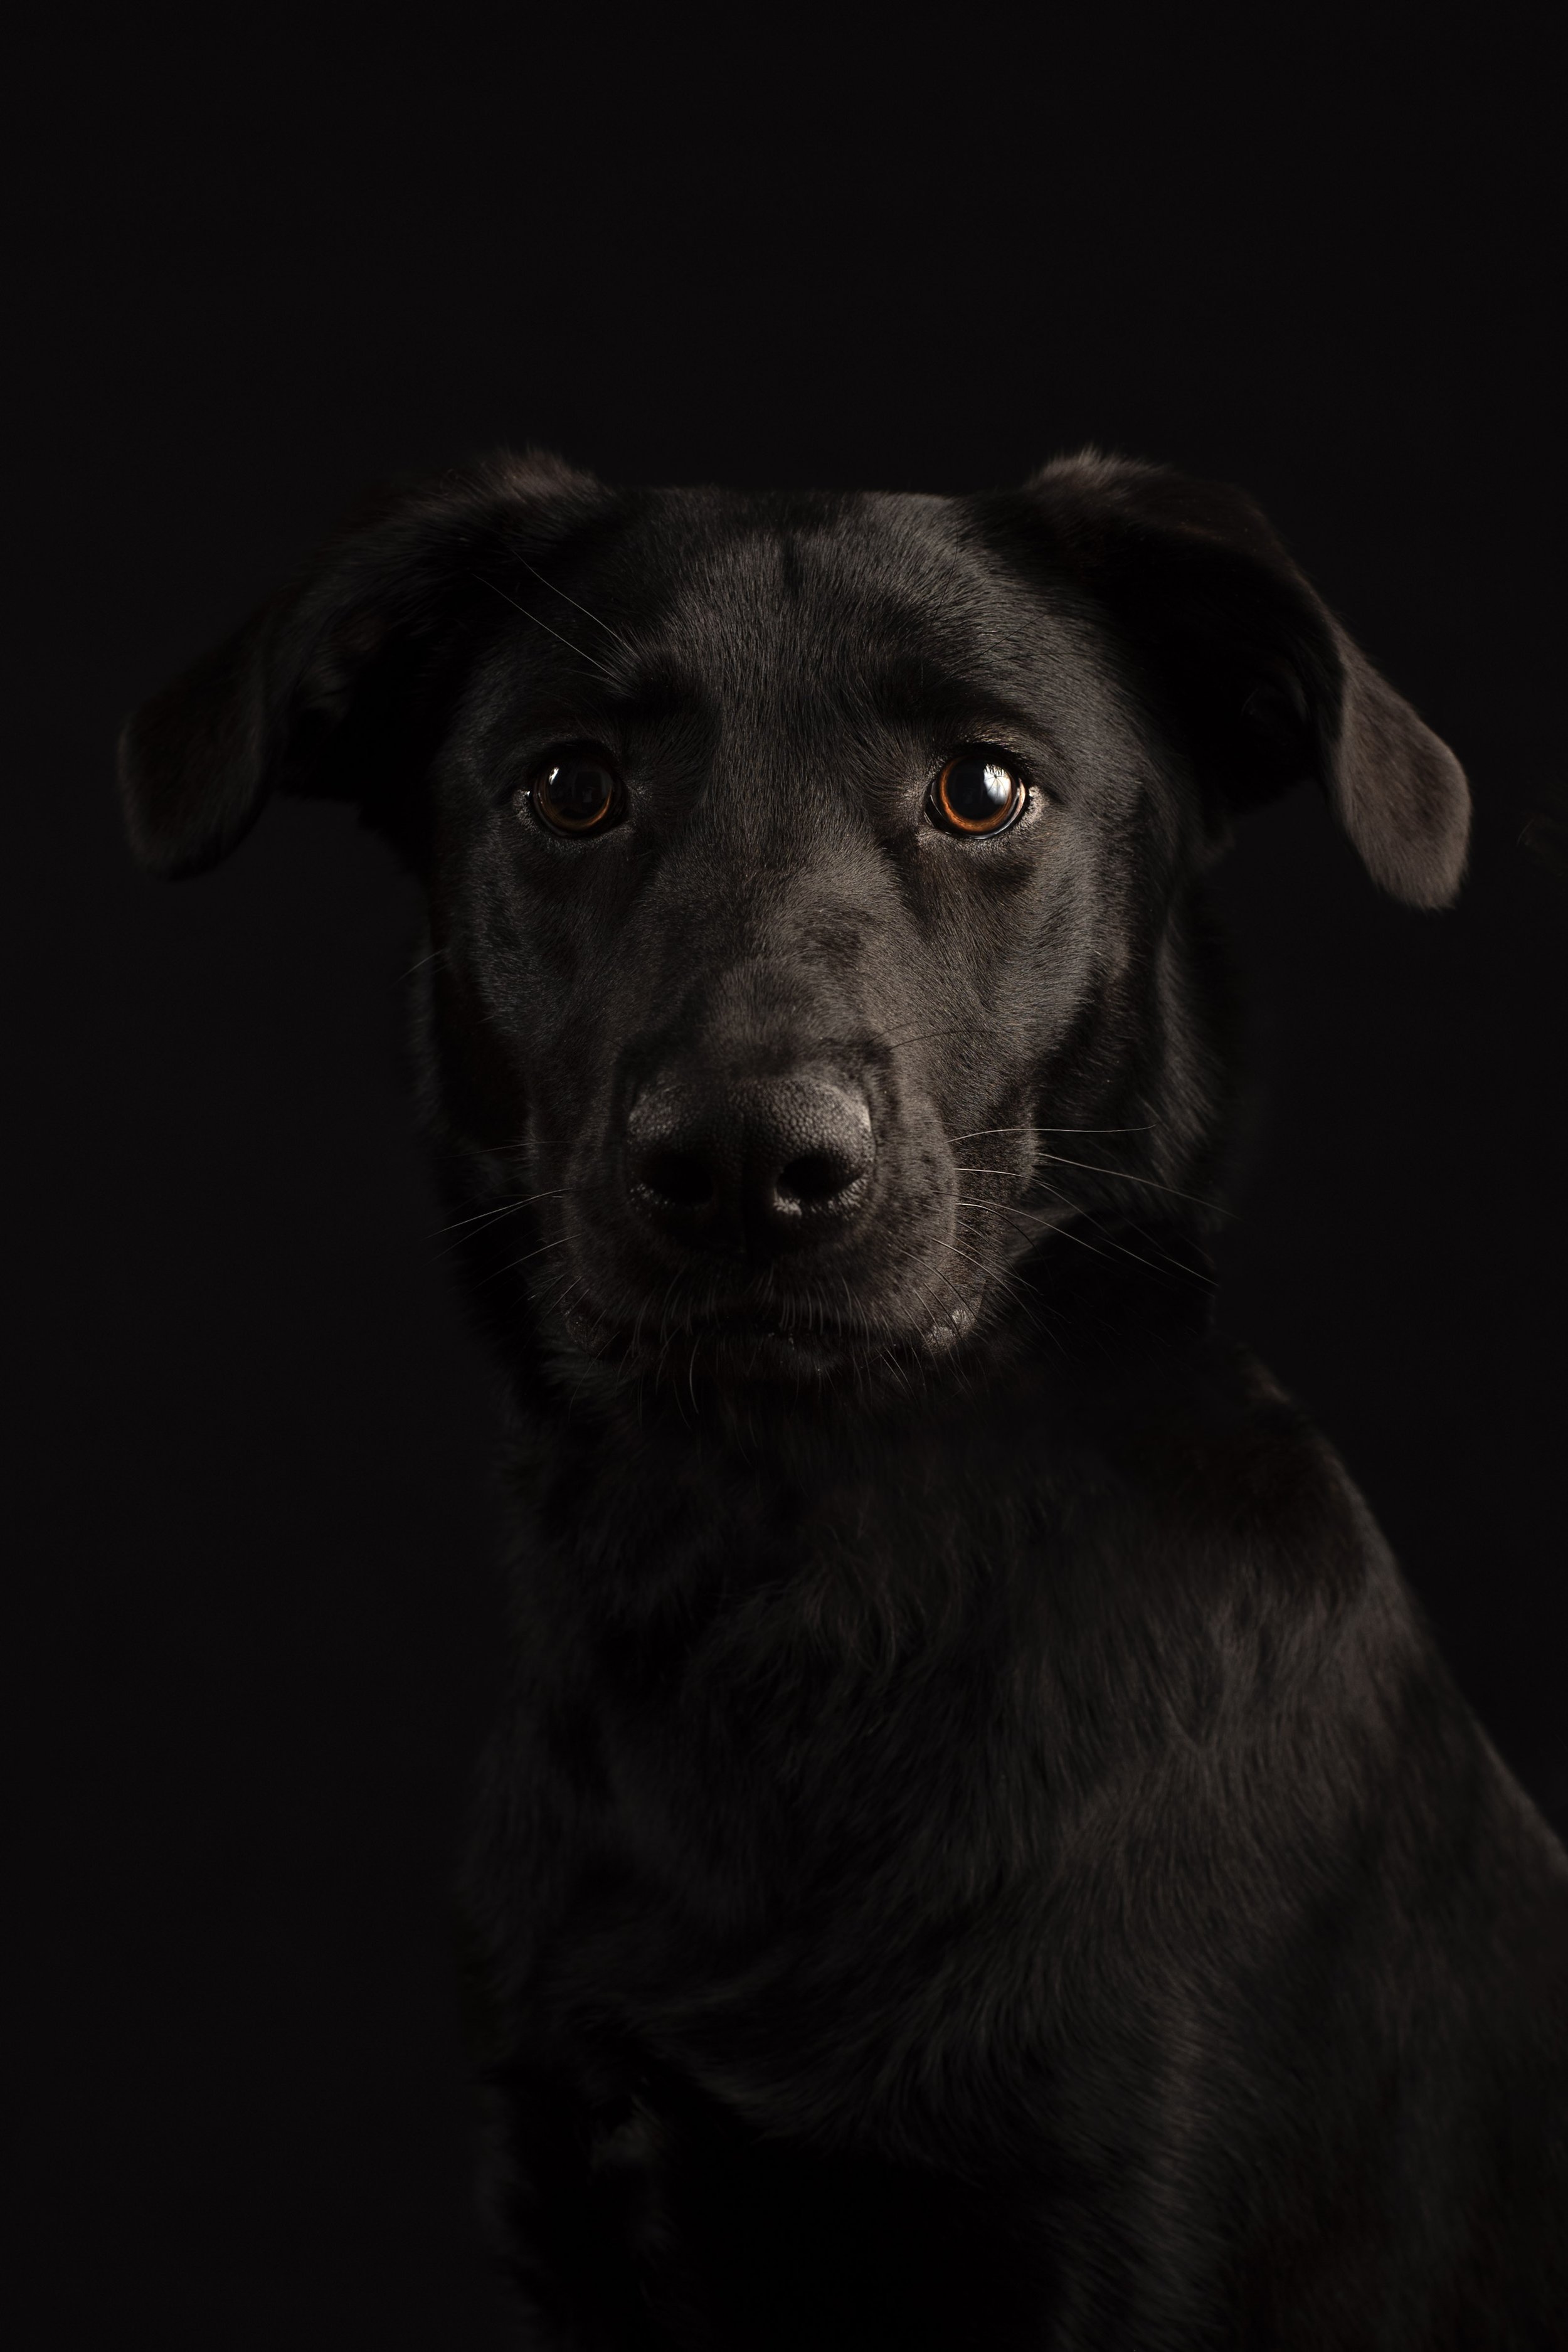 Caninoscuro: The Black Dog Project